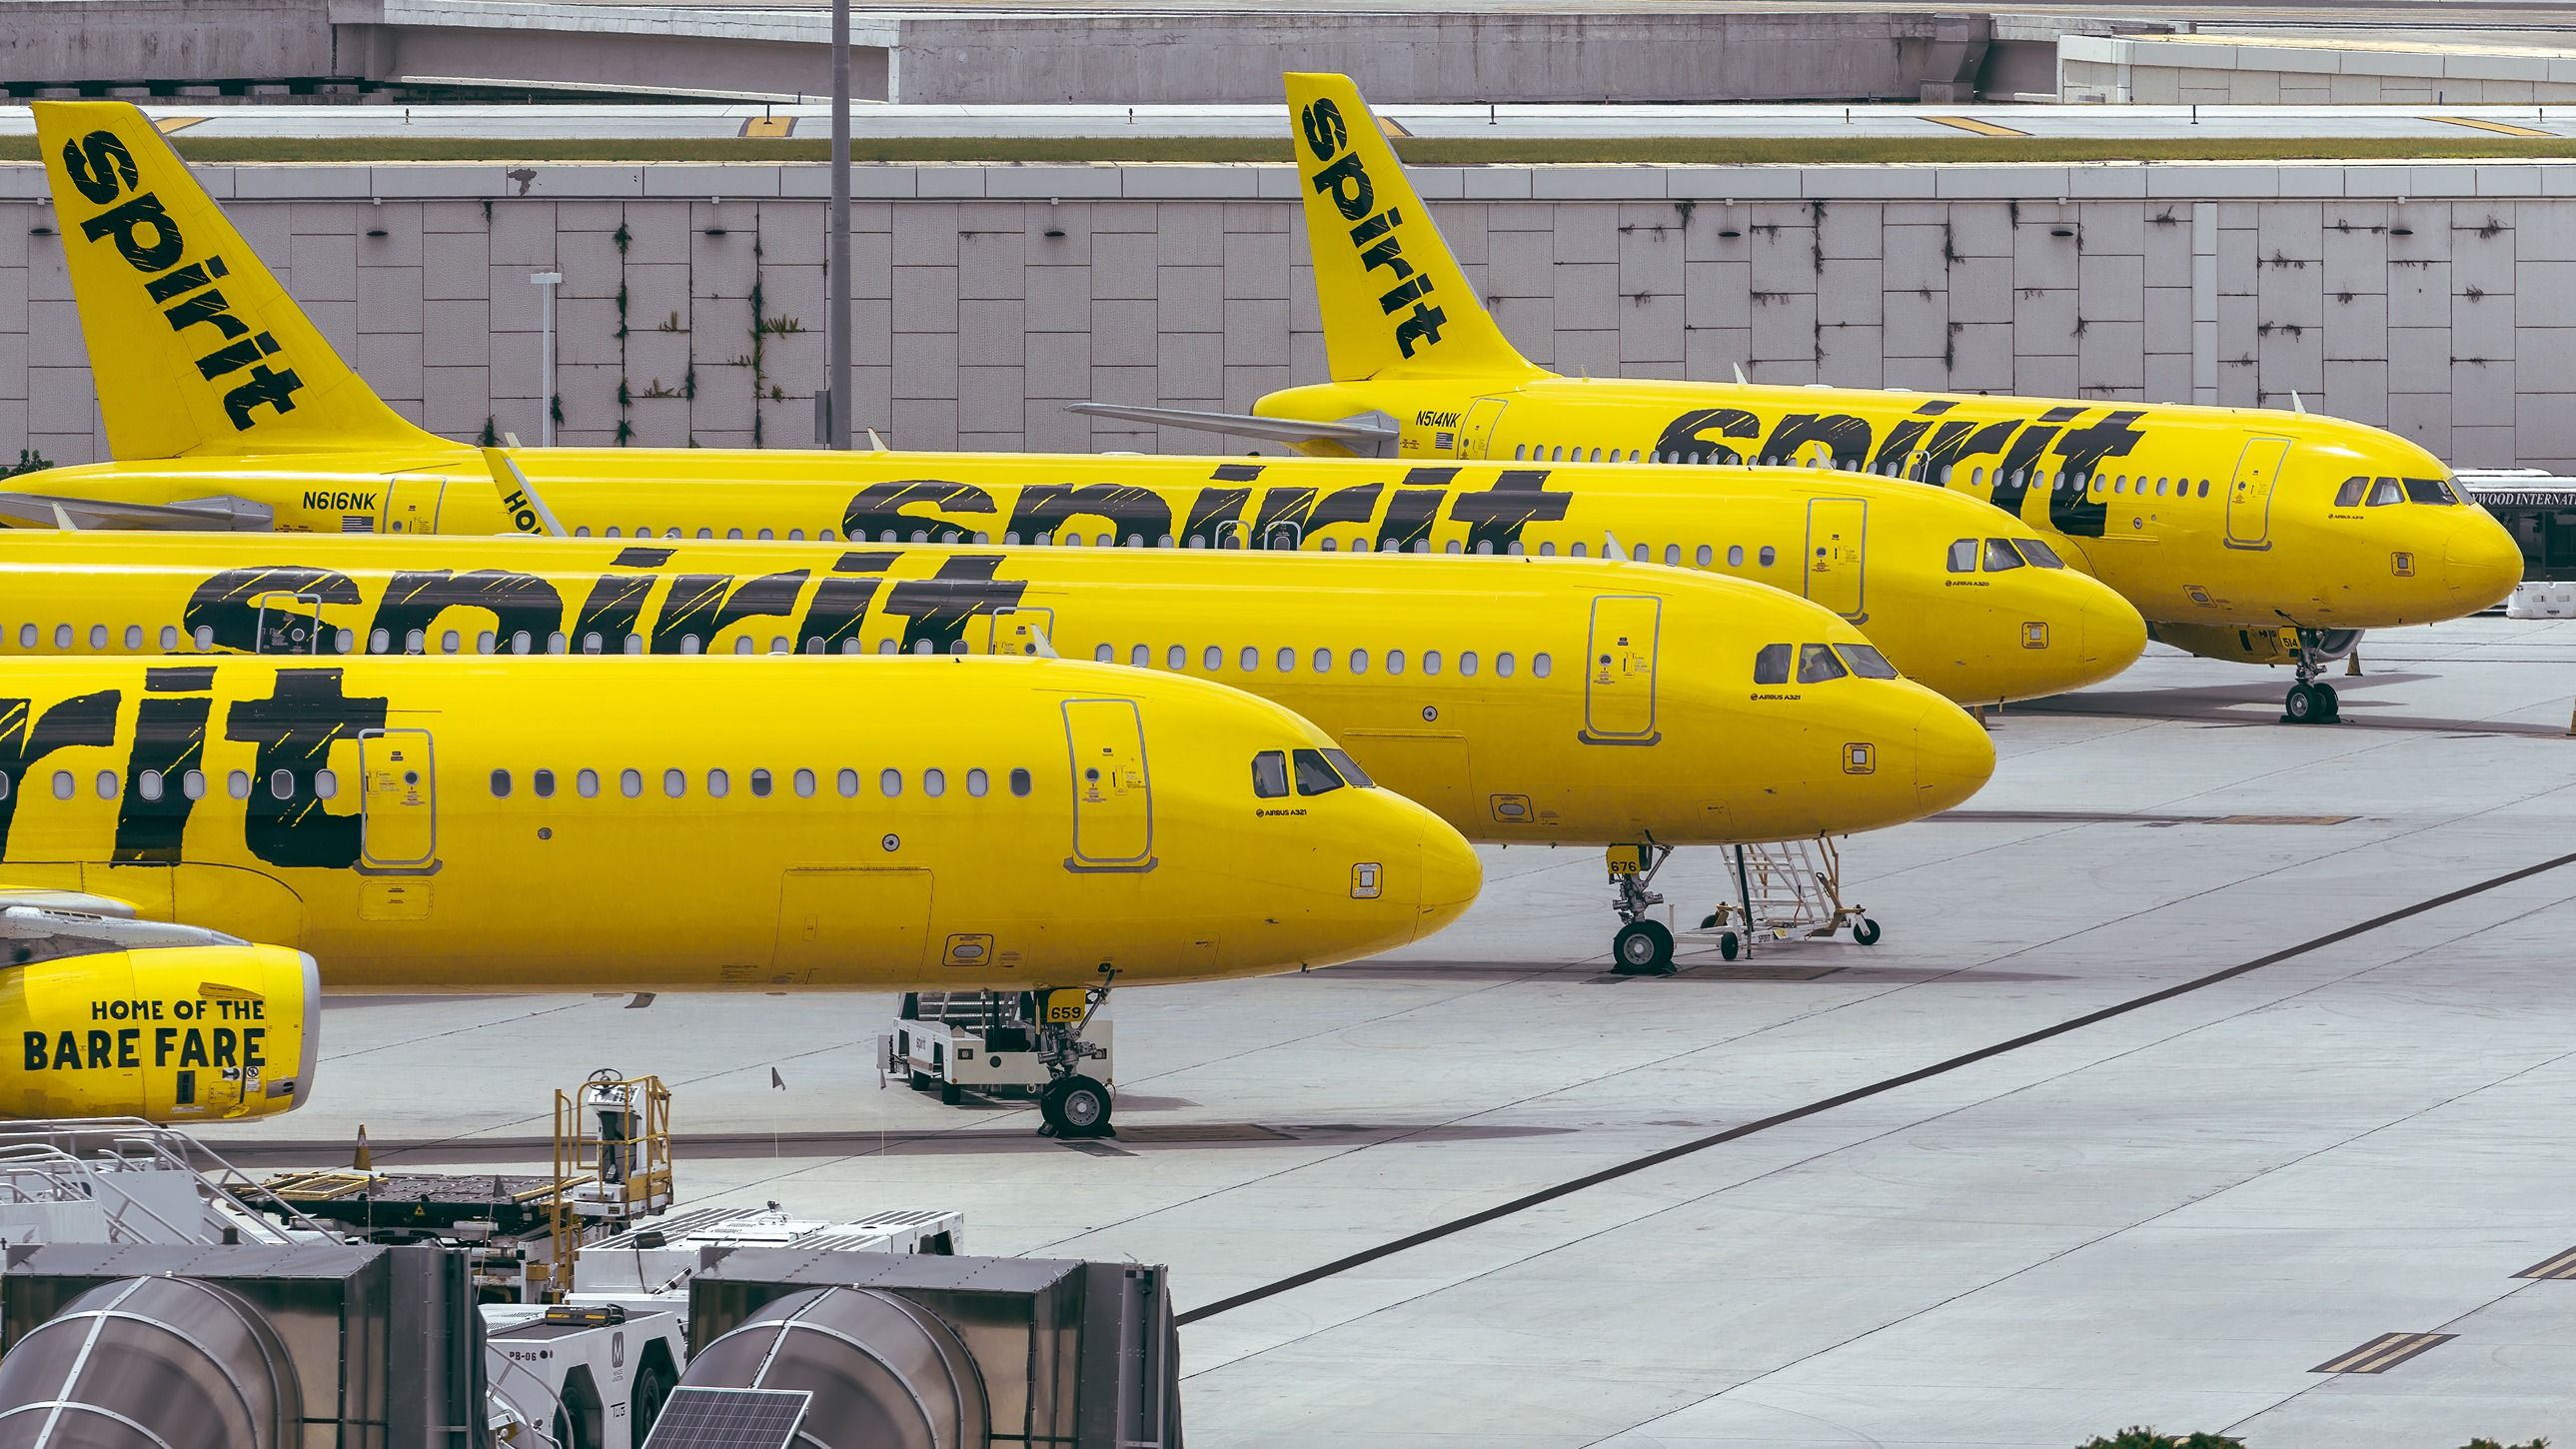 Several Spirit Airlines aircraft parked side by side on the apron at Fort Lauderdale Hollywood International Airport.